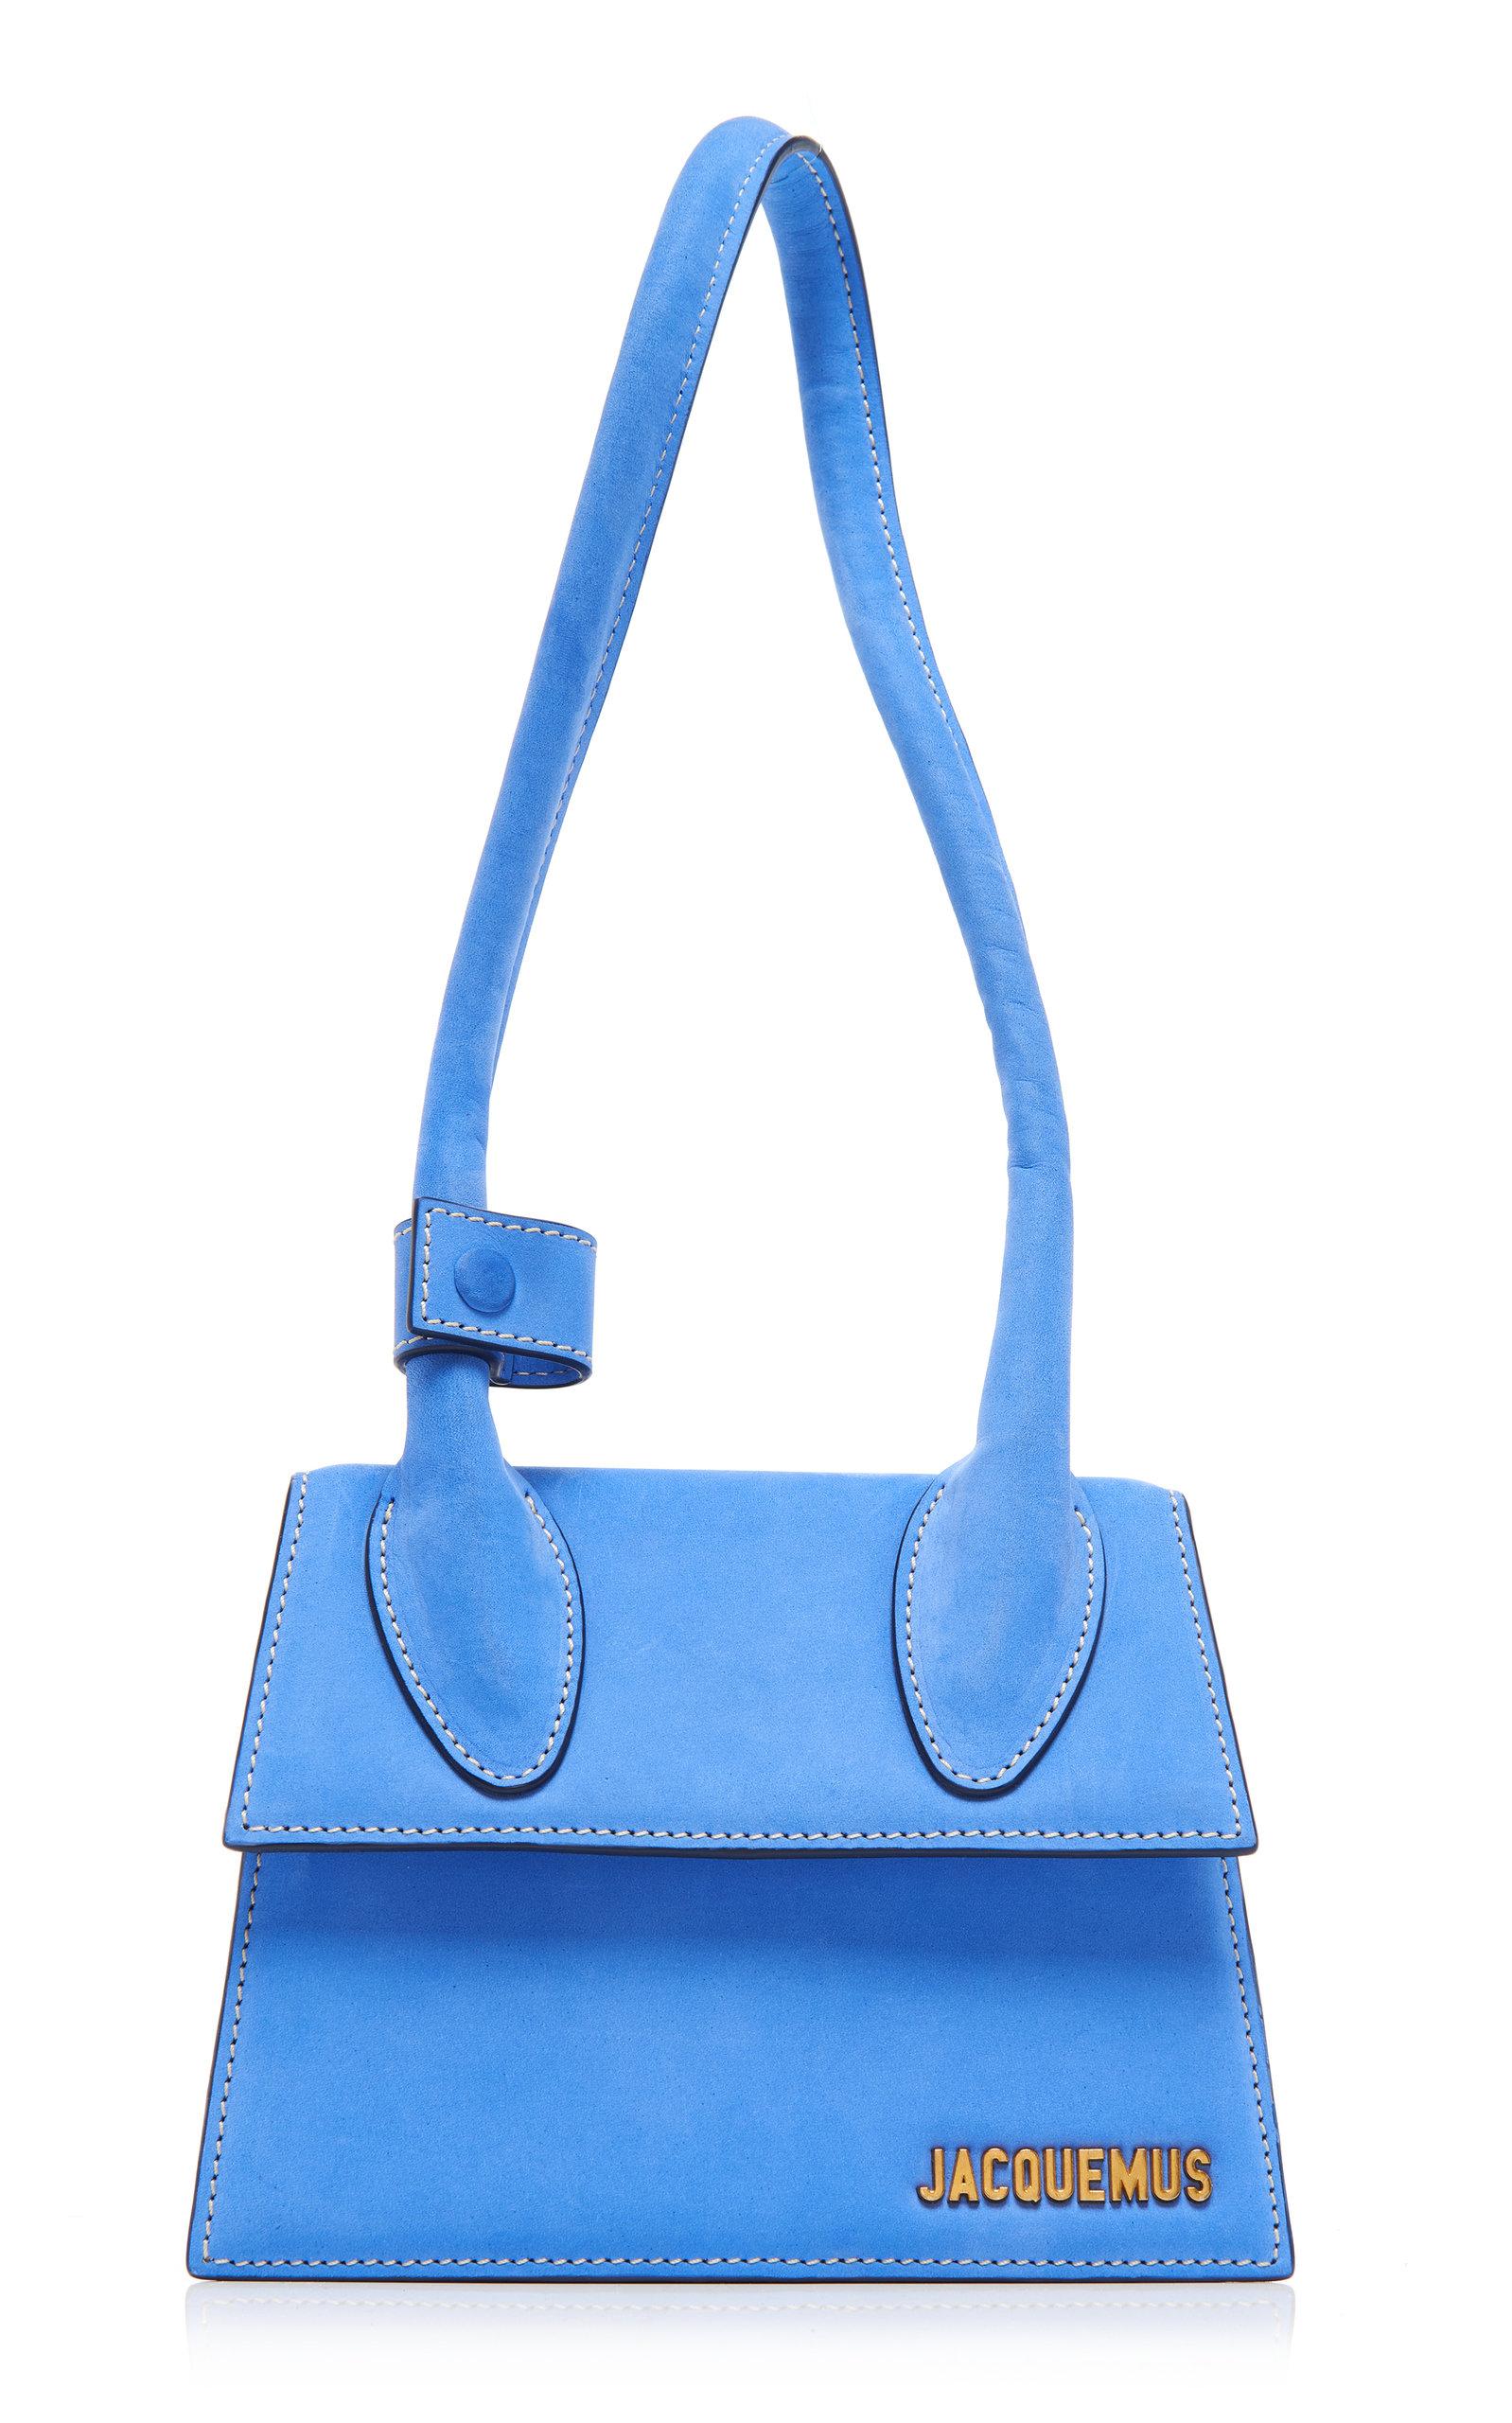 Jacquemus Le Chiquito Noeud Leather Bag in Blue - Lyst